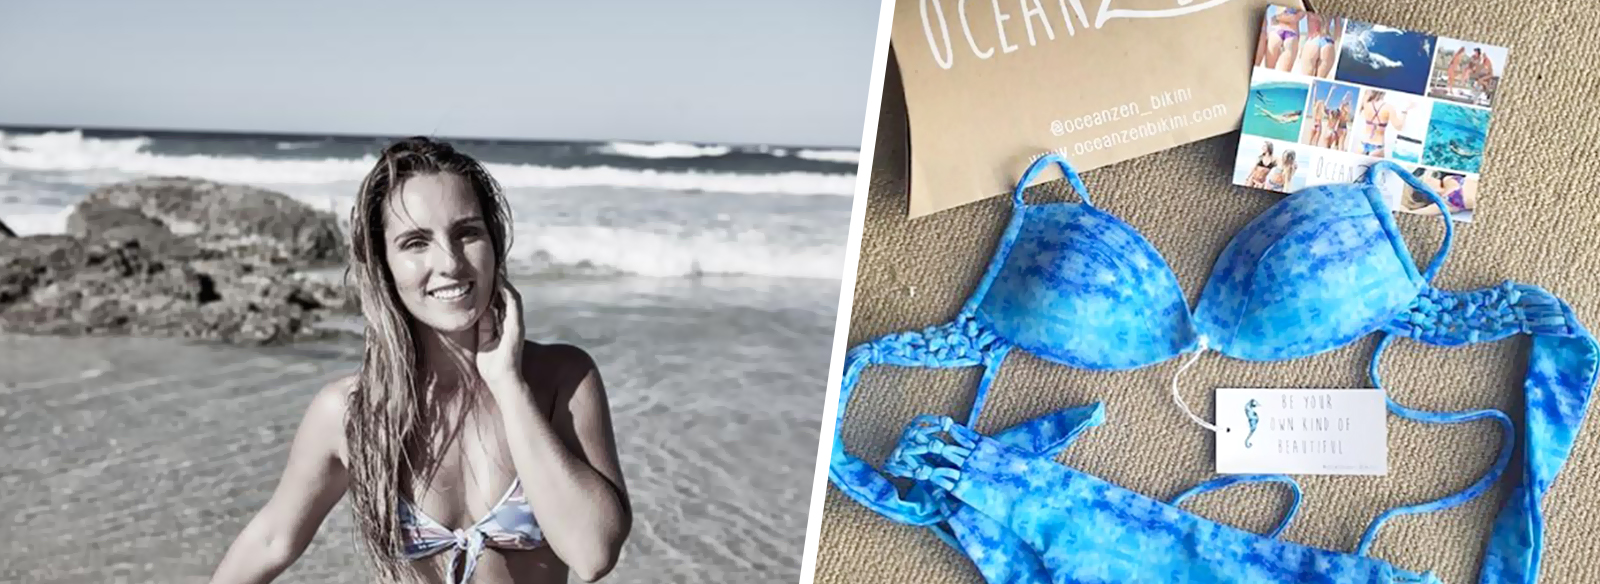 OceanZen: Empowering Women Who Loves to Take Care of the Ocean - Seams For Dreams